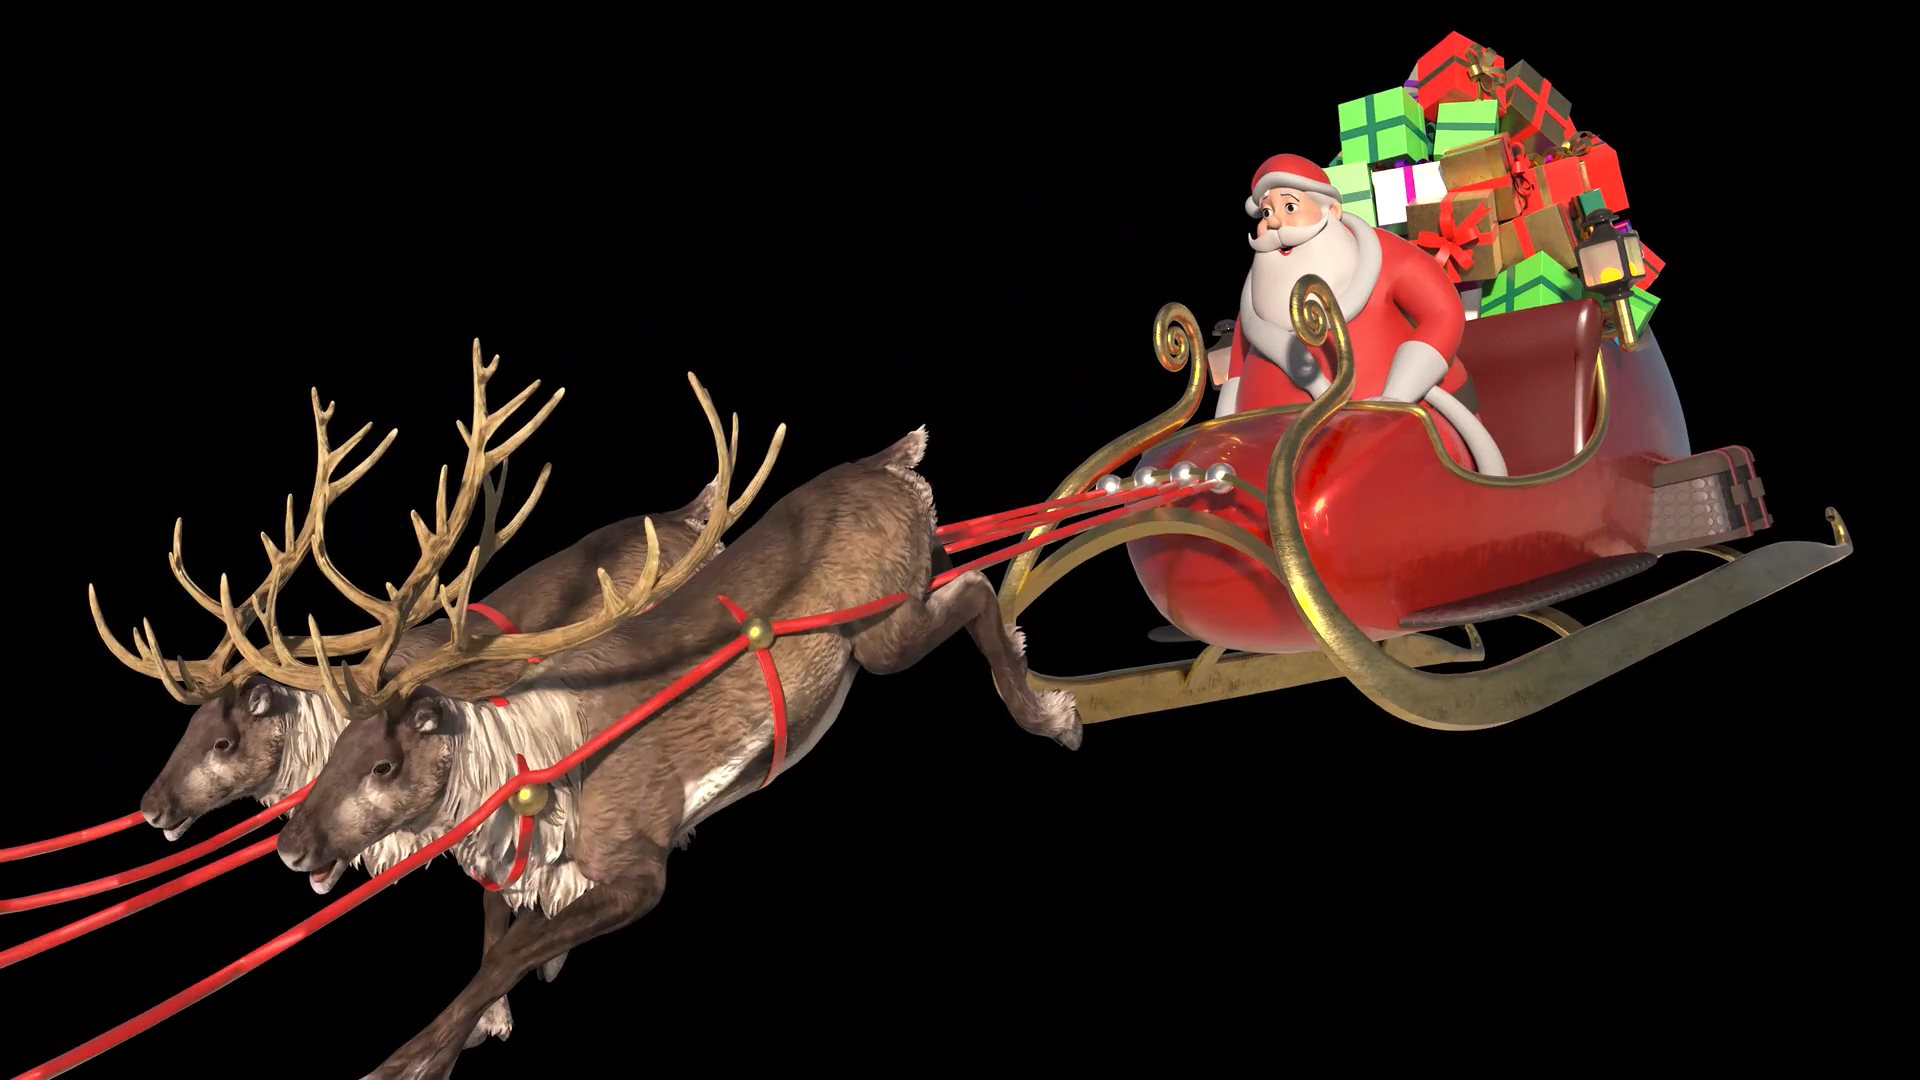 Video of Santa Claus flying in his sleigh with his reindeers